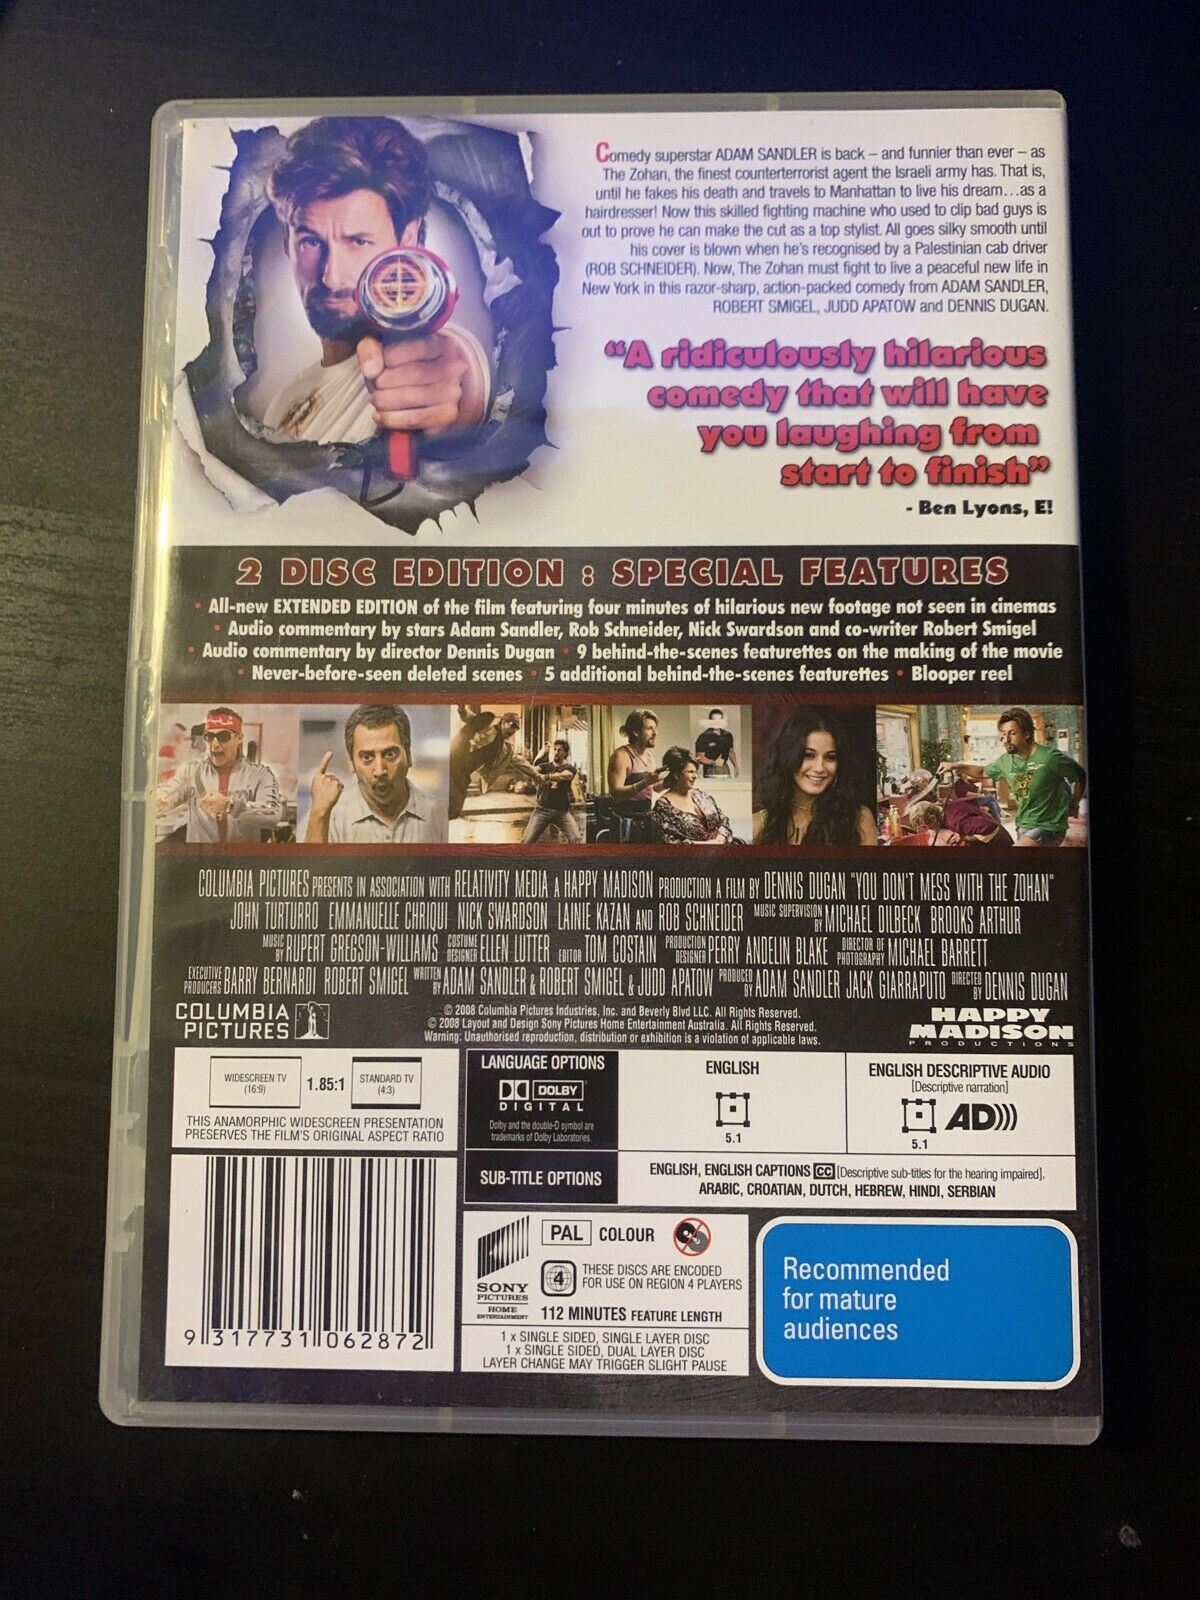 You Don't Mess with the Zohan - Revealing Extended Edition (DVD, 2008) Region 4